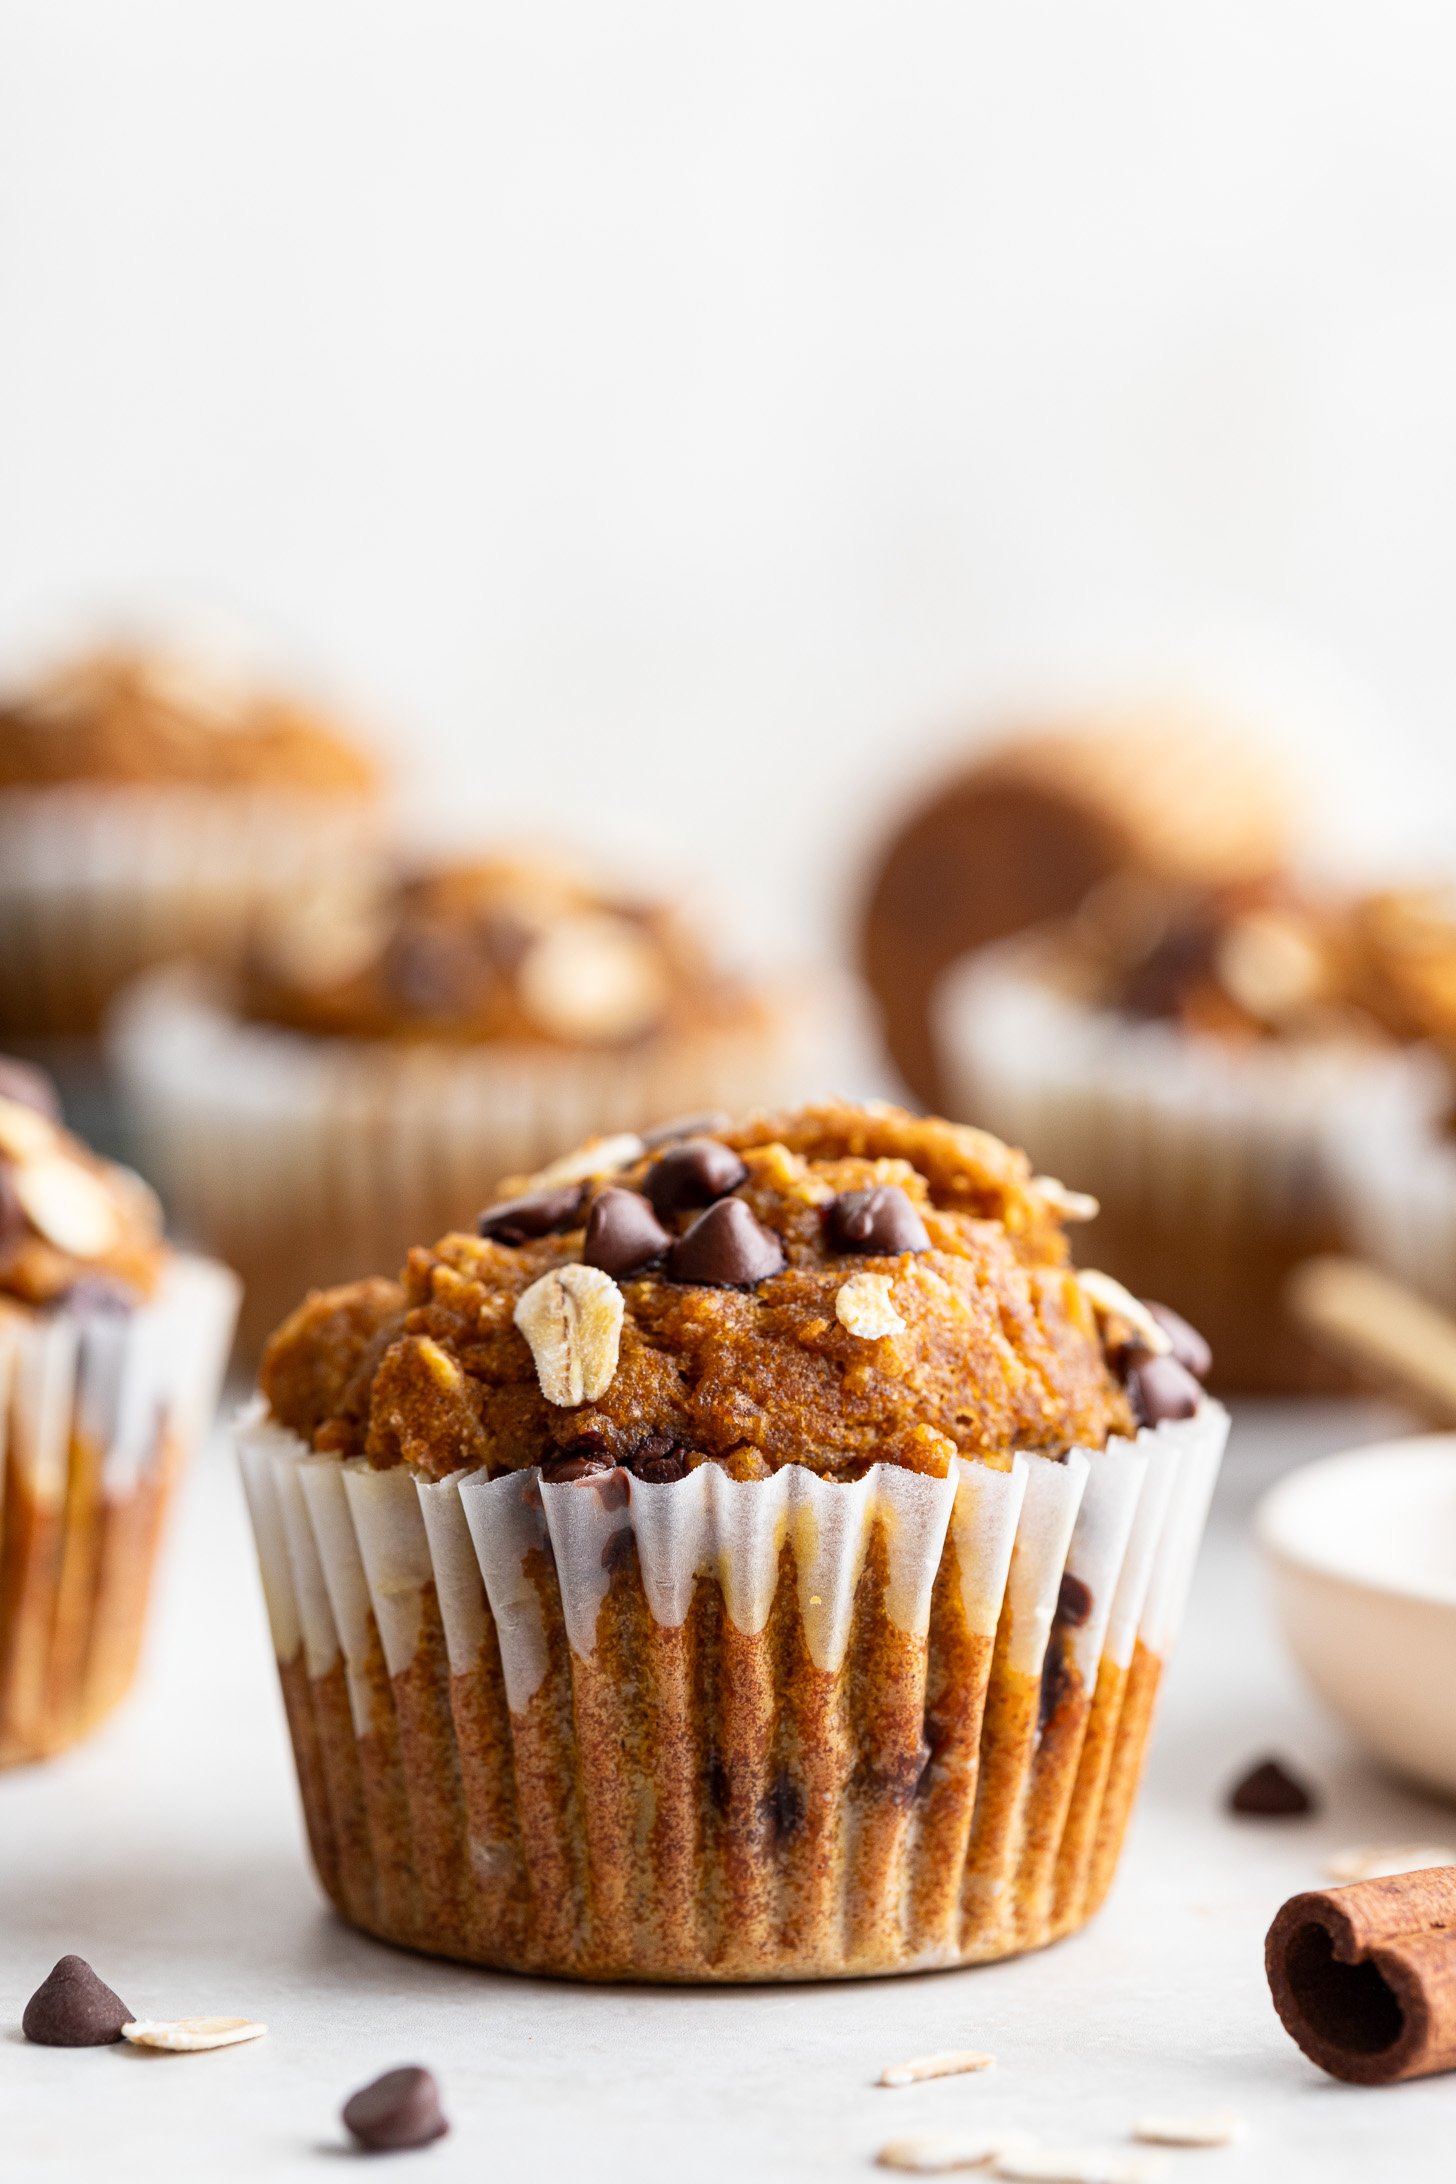 Muffin in a muffin liner with chocolate chips and oatmeal on top sitting on a white surface. More muffins are out-of-focus in the background. A few chocolate chips, oats, and a cinnamon stick are strewn on the counter.